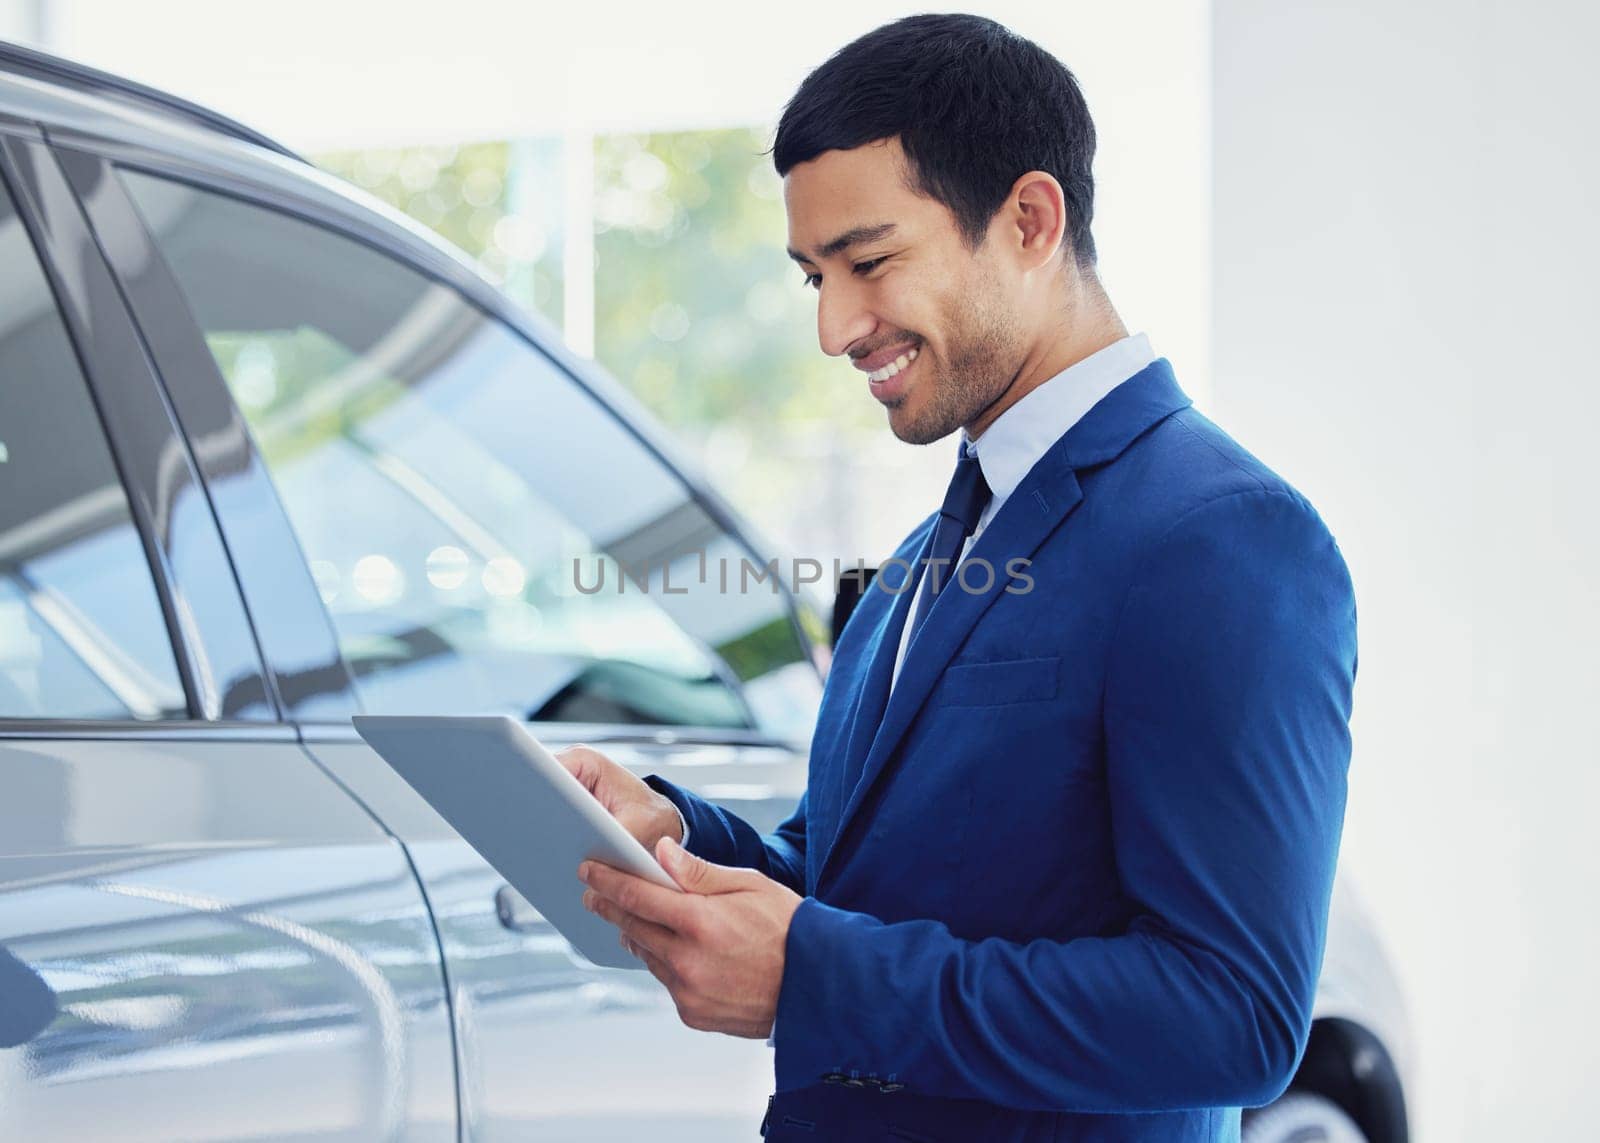 Tablet, car and salesman smile at showroom, workshop or salon workplace. Internet, technology and male person at dealership for motor vehicle shopping, web scroll and email app in auto retail store